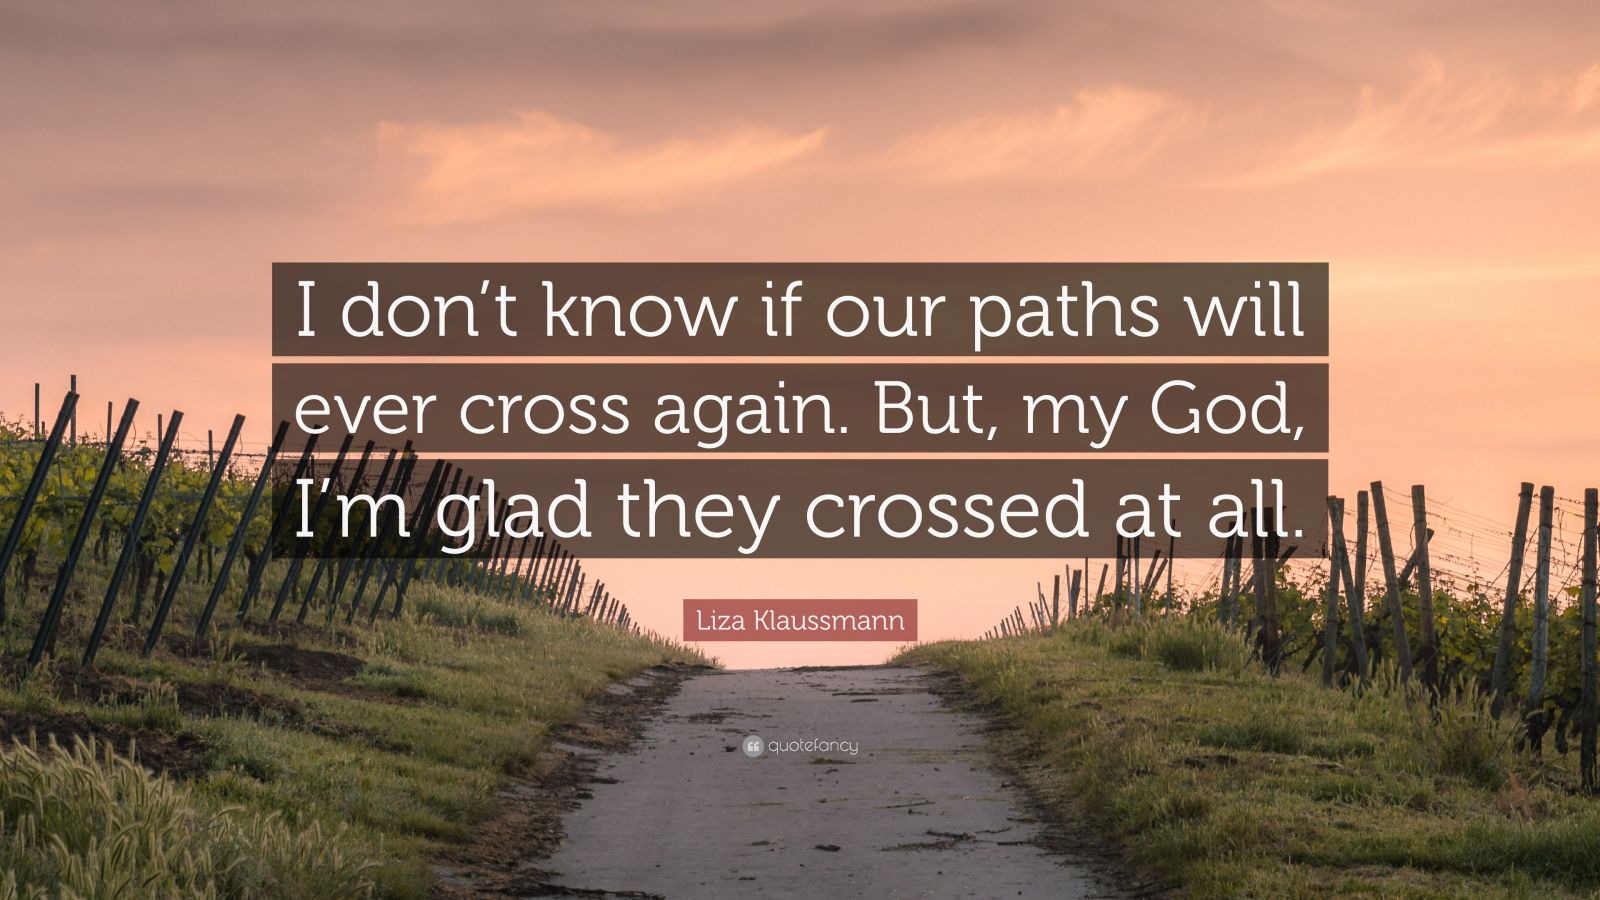 Liza Klaussmann Quote: “I don't know if our paths will ever cross again. But,  my God, I'm glad they crossed at all.”